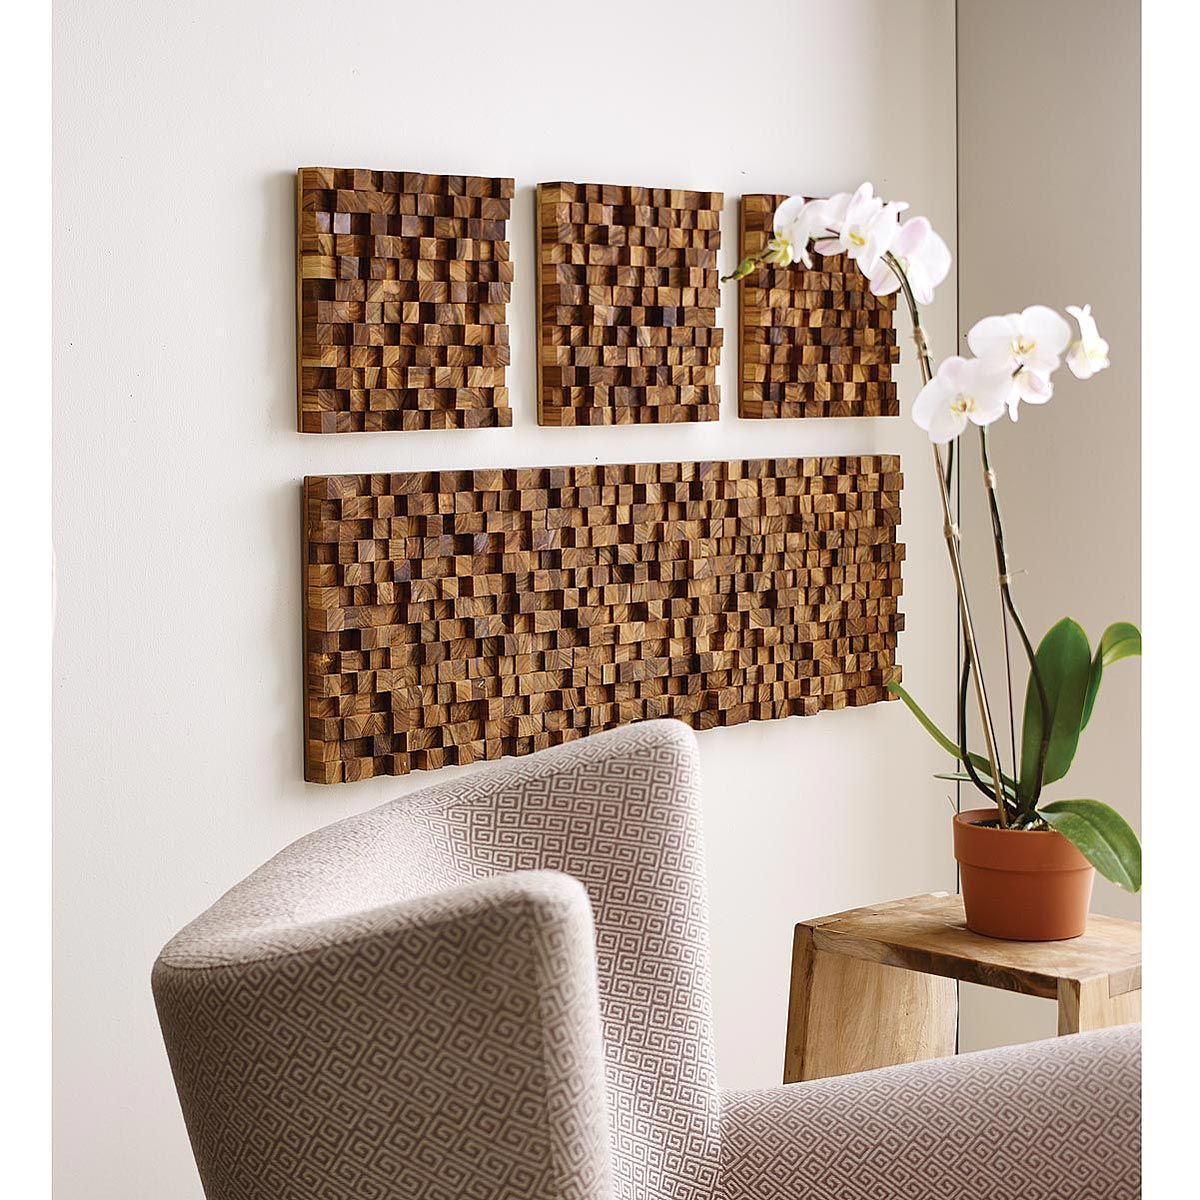 Square Takara Wall Art | Teak Wood, 3d Art | Uncommongoods Throughout Square Wall Art (View 2 of 15)